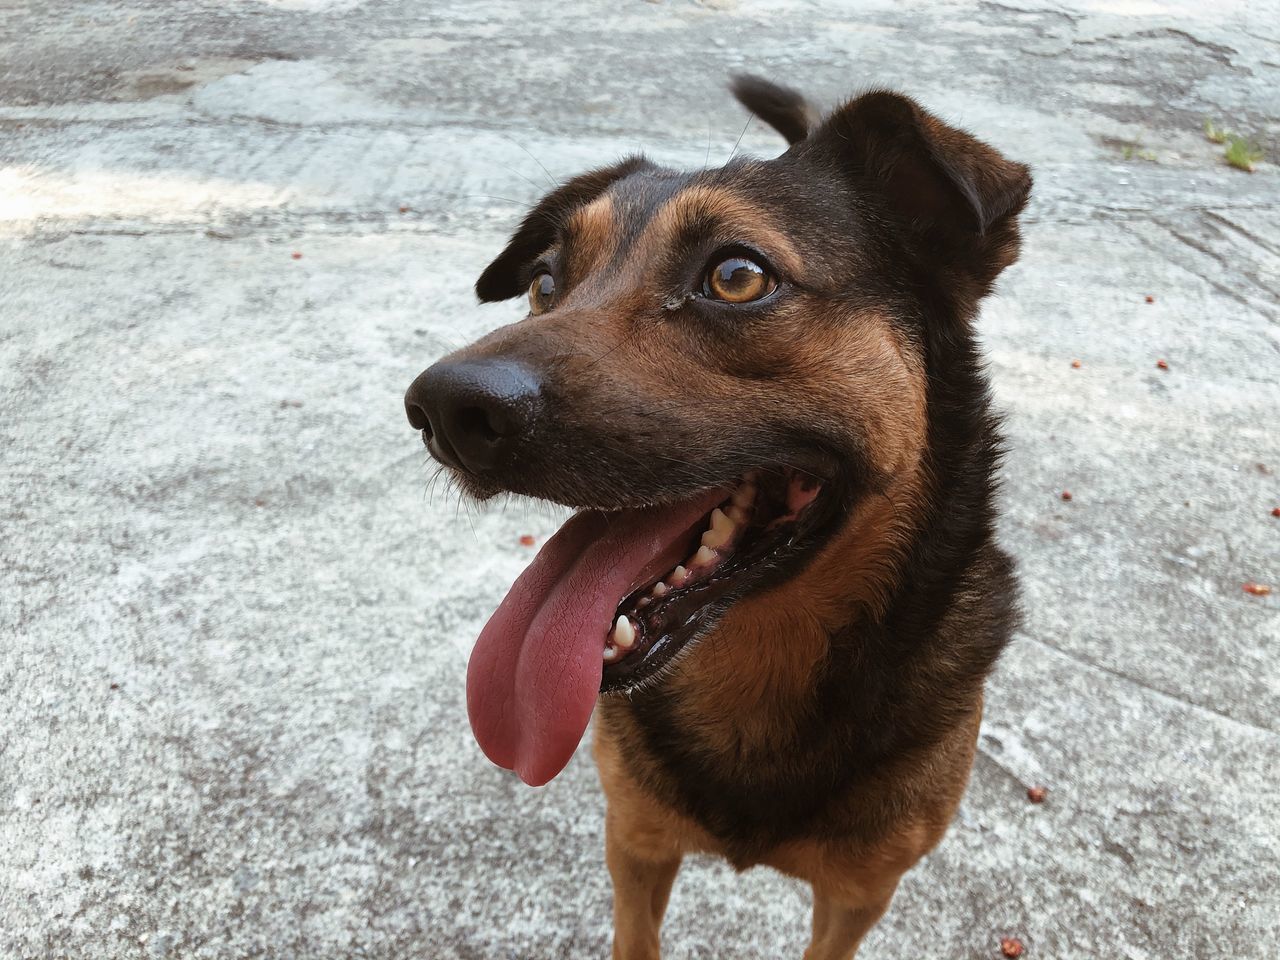 dog, canine, one animal, animal themes, animal, domestic animals, mammal, domestic, pets, vertebrate, looking, day, looking away, mouth open, facial expression, mouth, high angle view, no people, portrait, sticking out tongue, outdoors, animal head, animal tongue, panting, snout, animal mouth